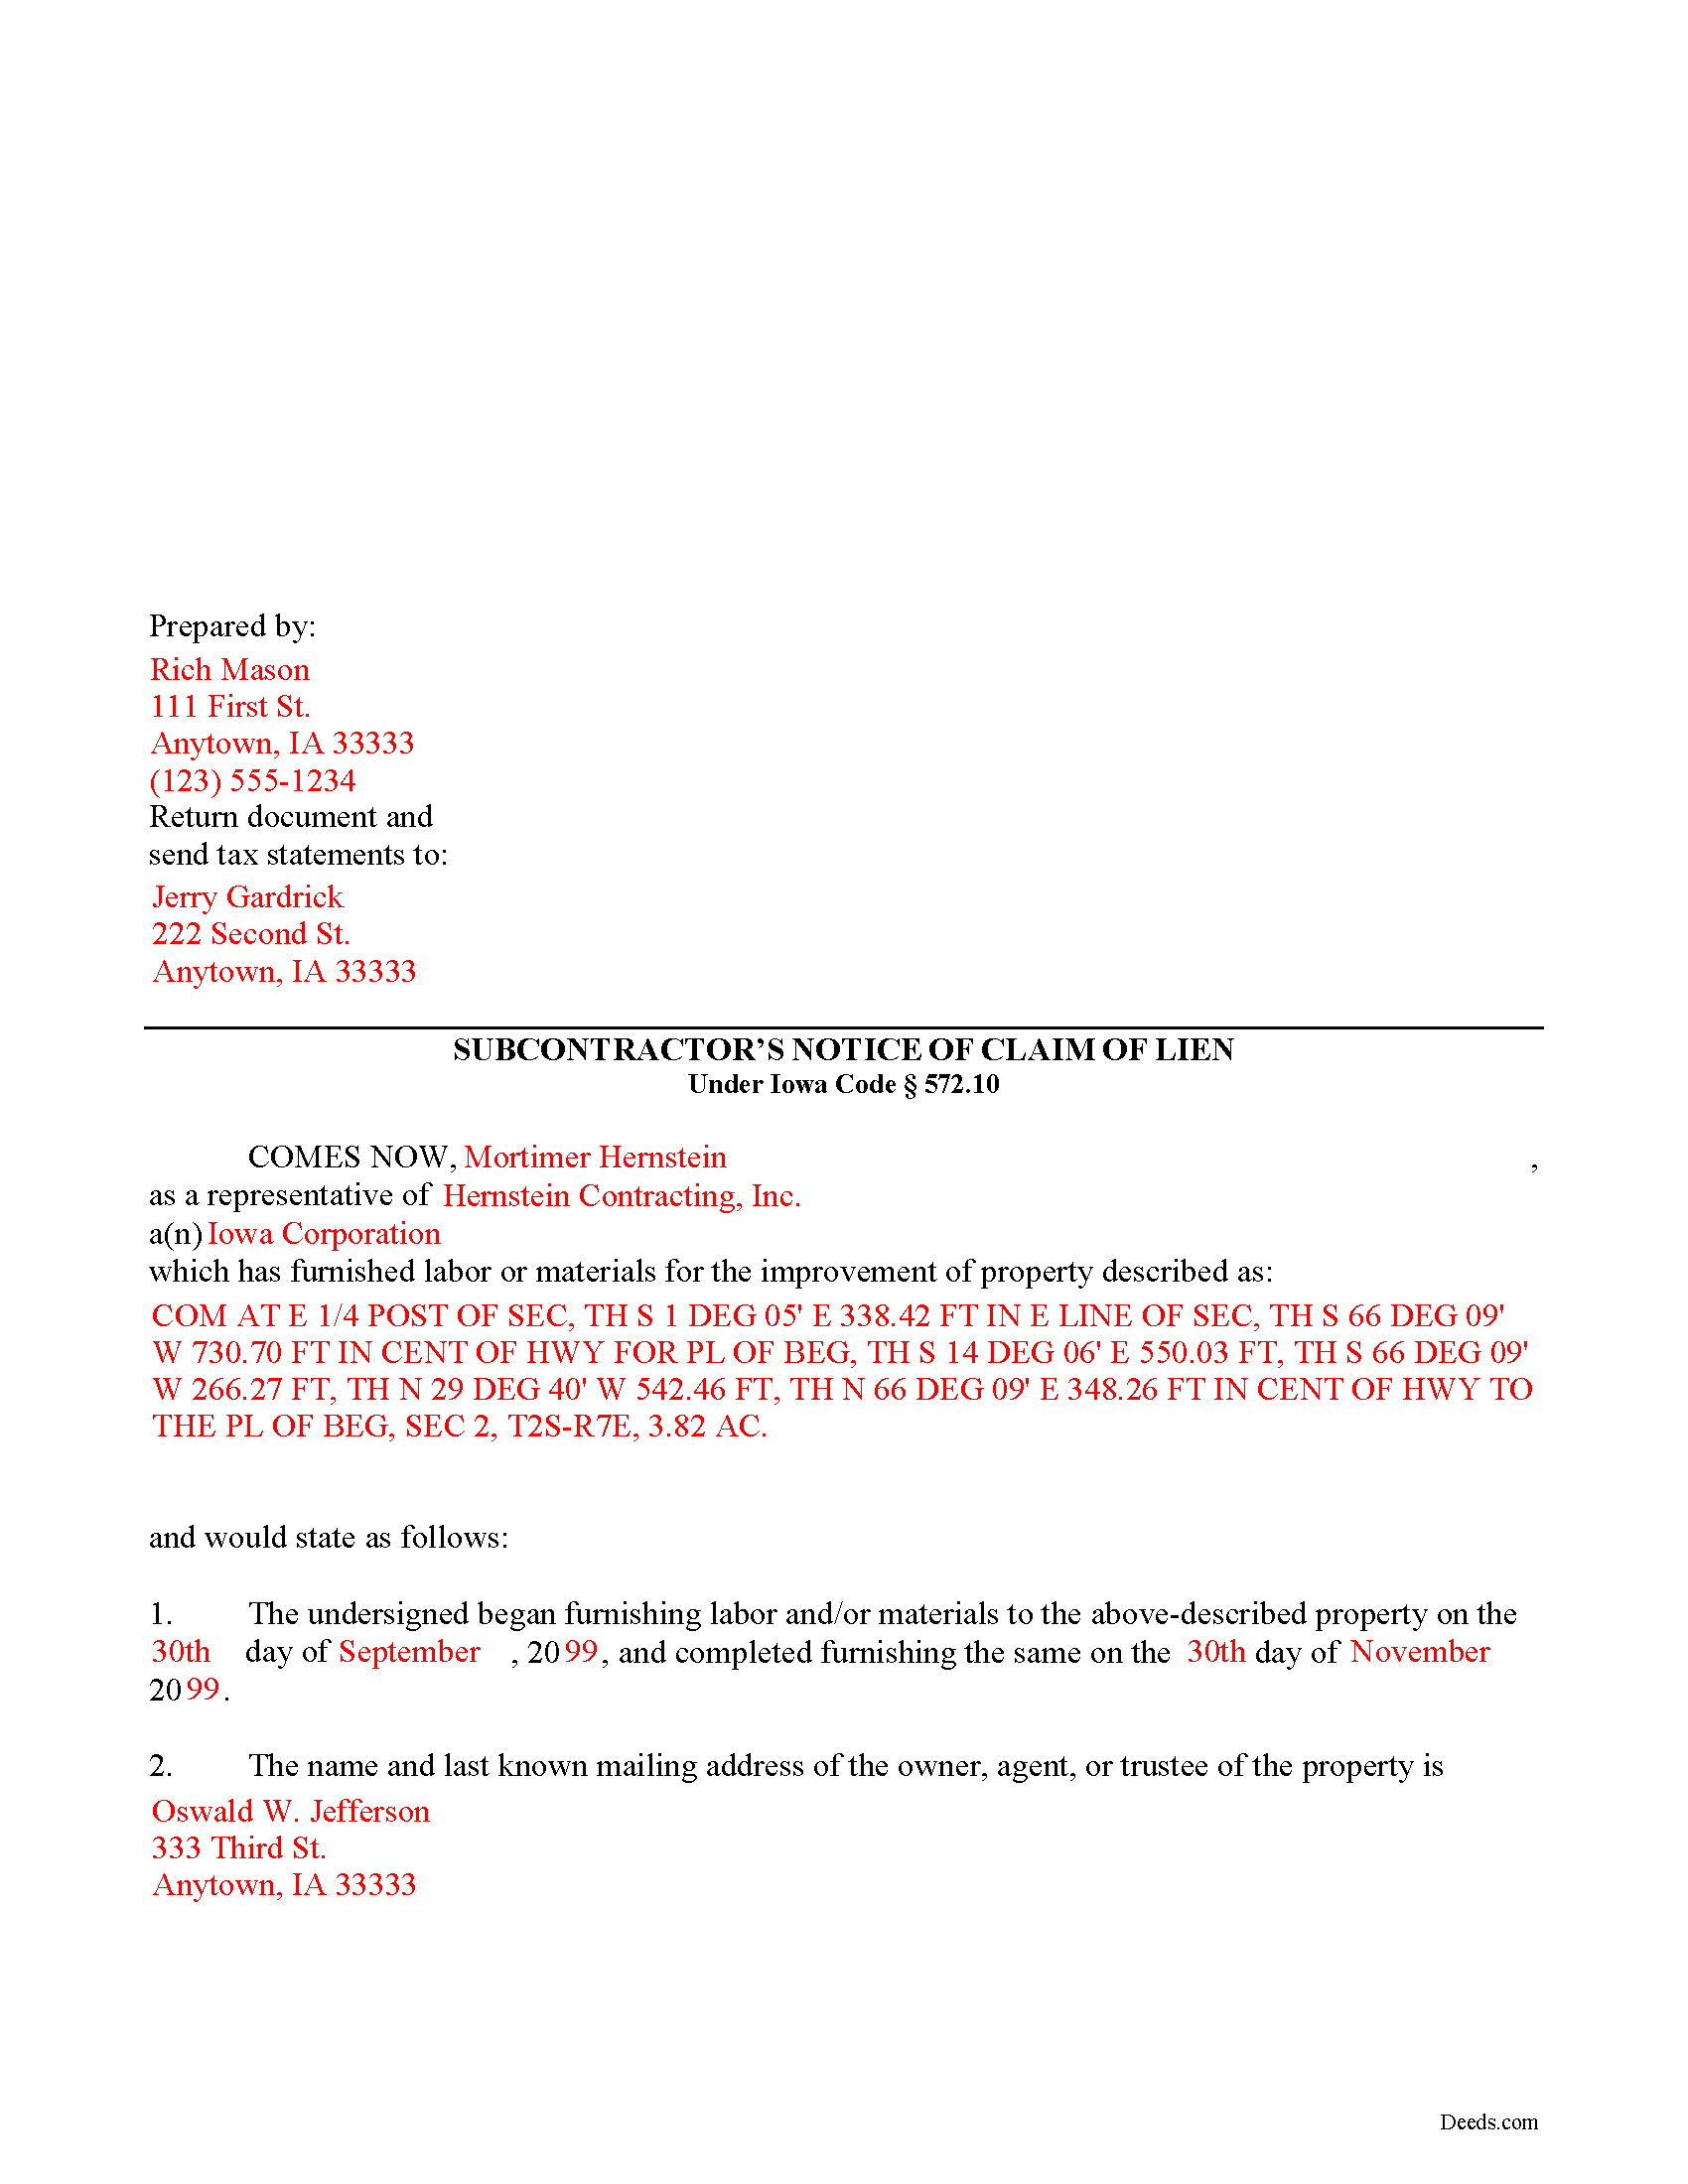 Completed Example of the Subcontractor Claim of Mechanics Lien Document